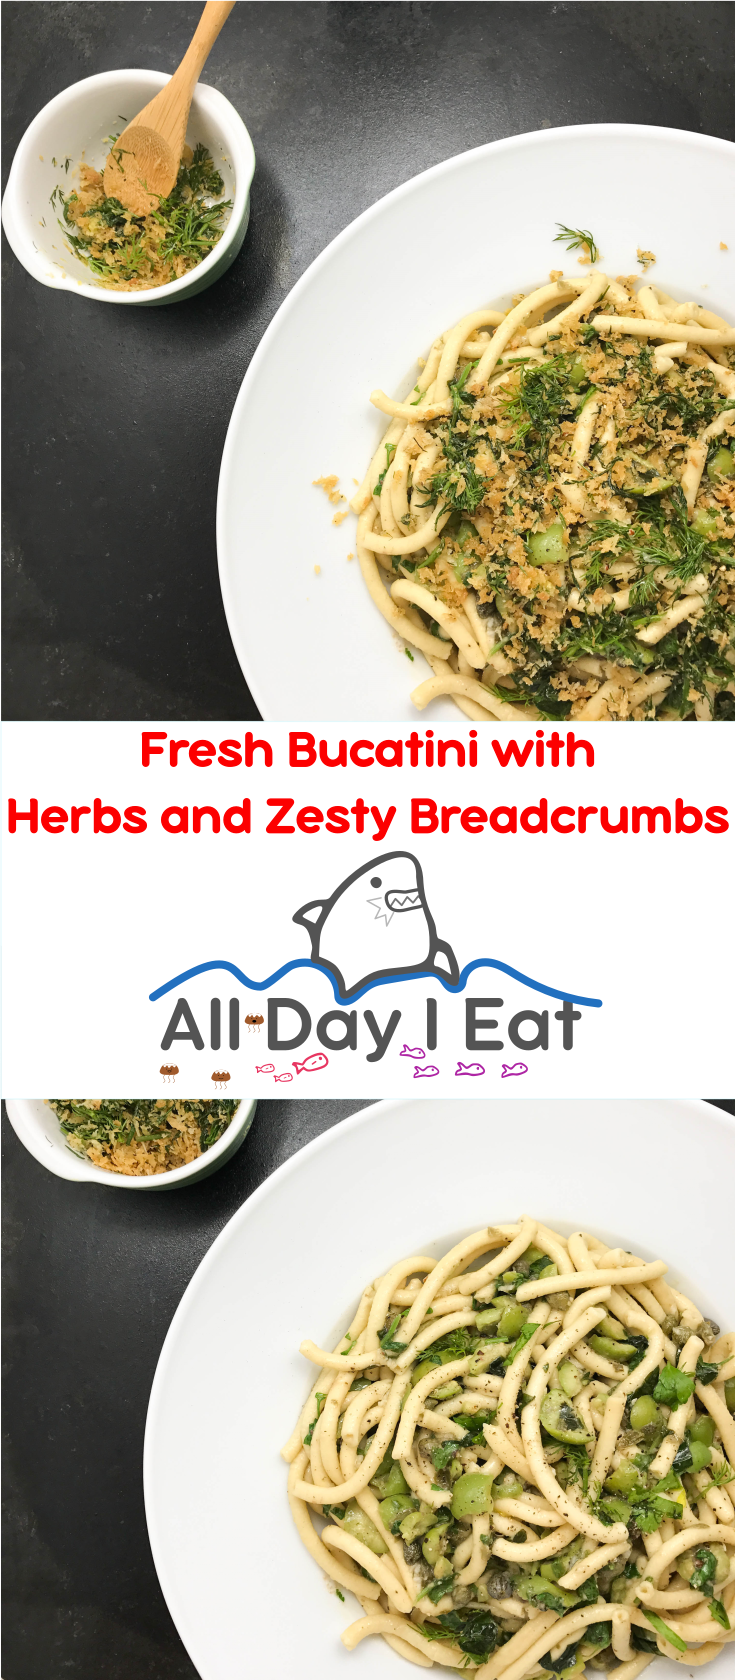 Bucatini with Fresh Herbs and Zesty Breadcrumbs. Make this with fresh pasta to allow the herbs and olives shine like the sun! | www.alldayieat.com